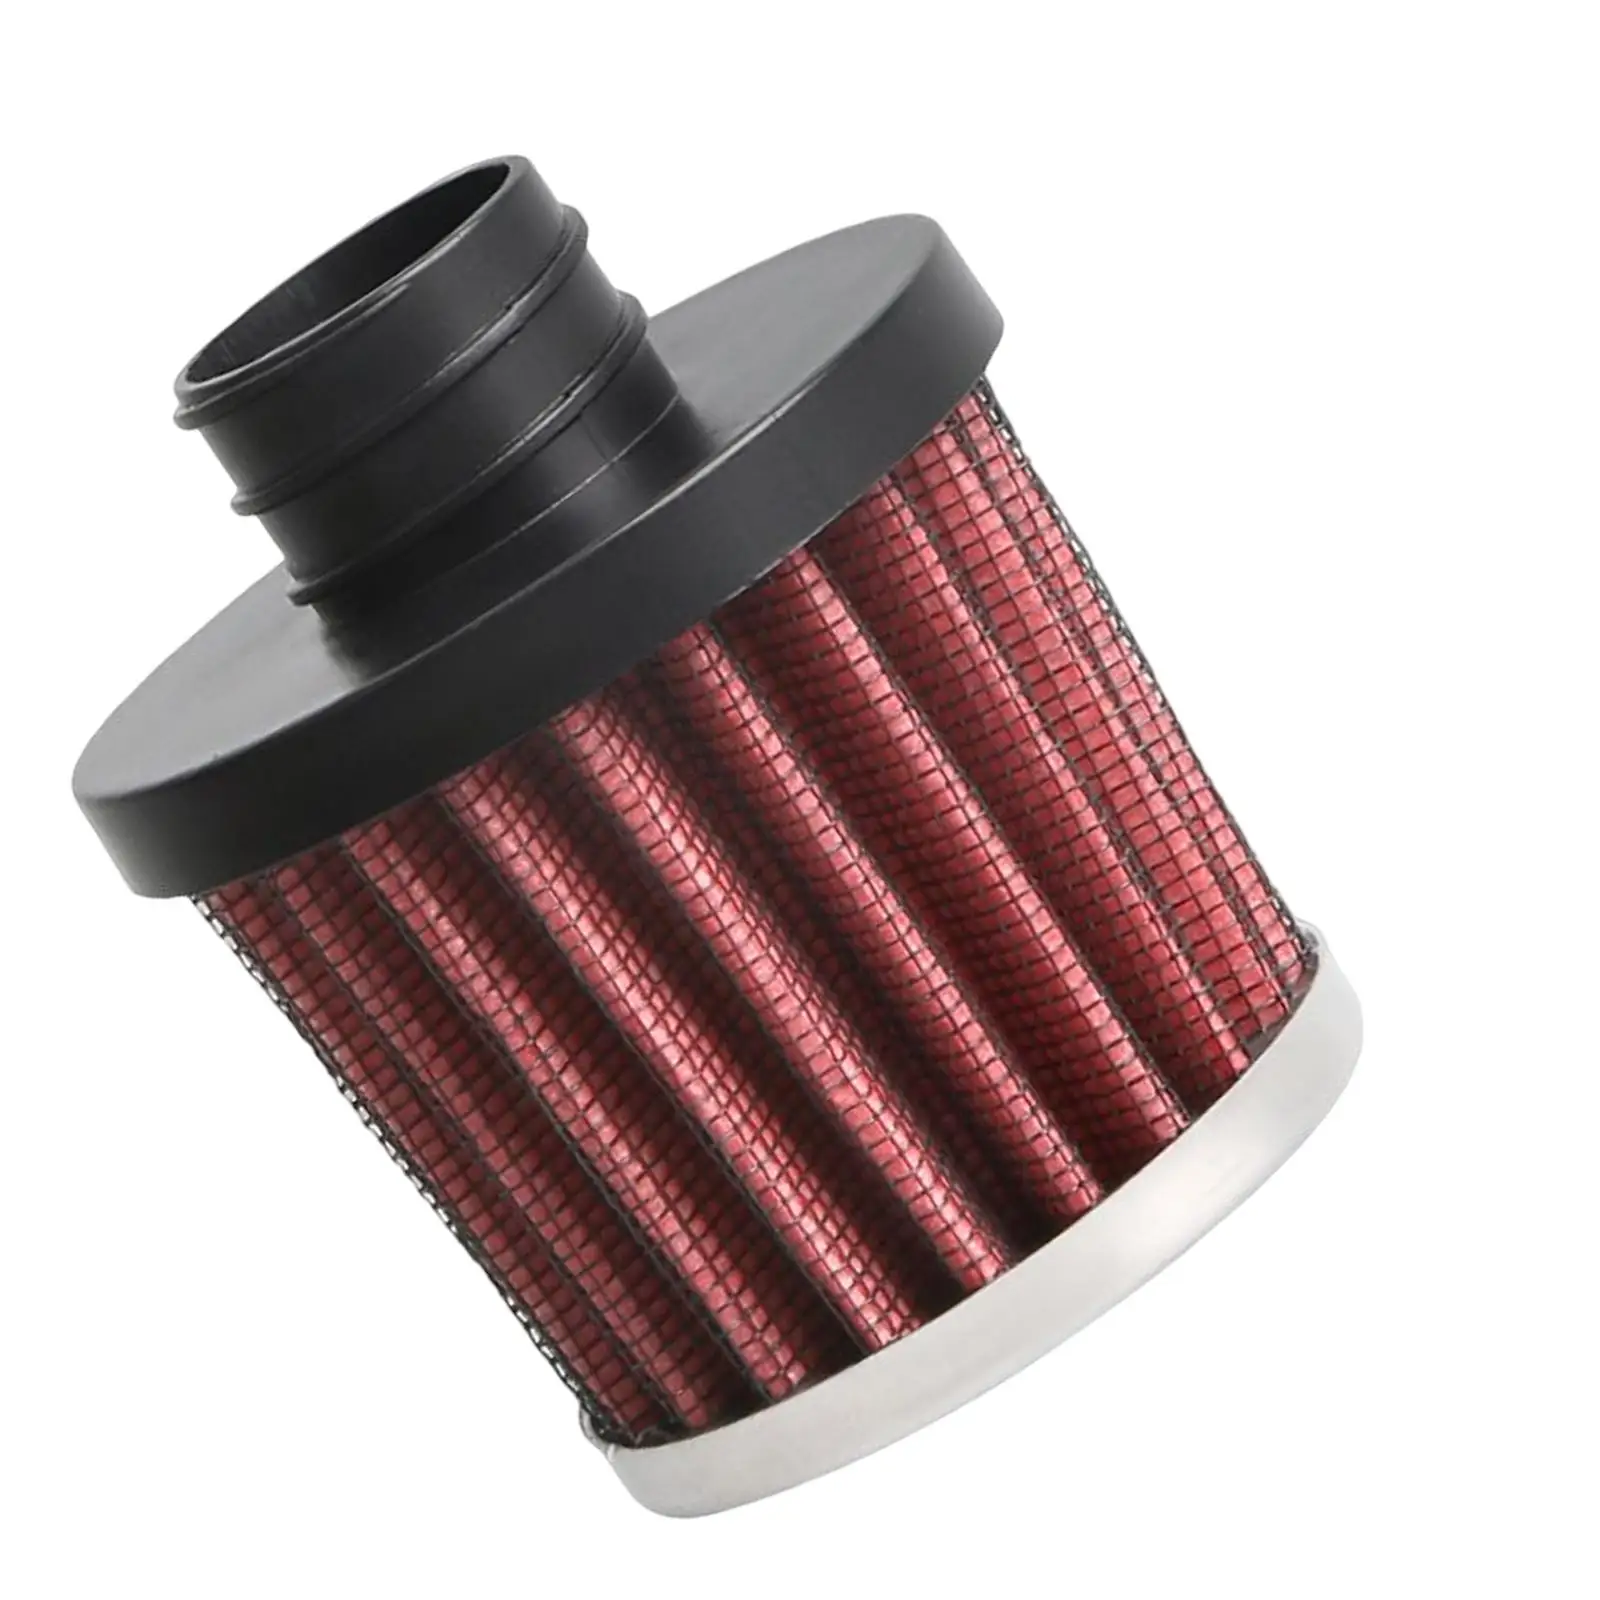 25mm Parking heating Air Intake Filter Universal for Parking heating Durable Car High